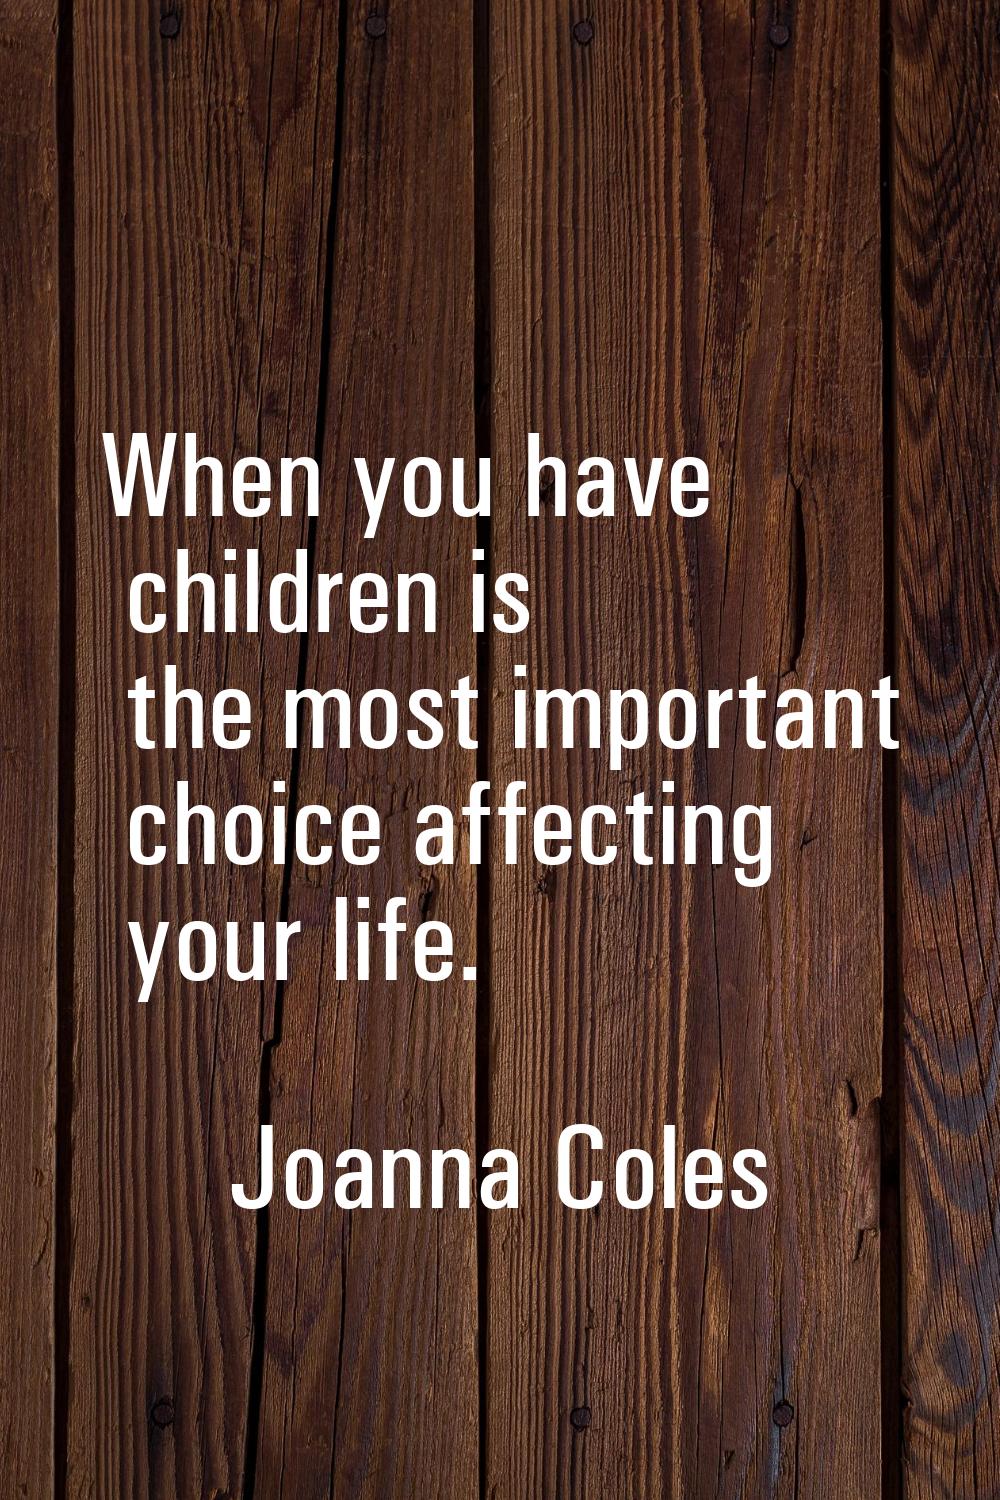 When you have children is the most important choice affecting your life.